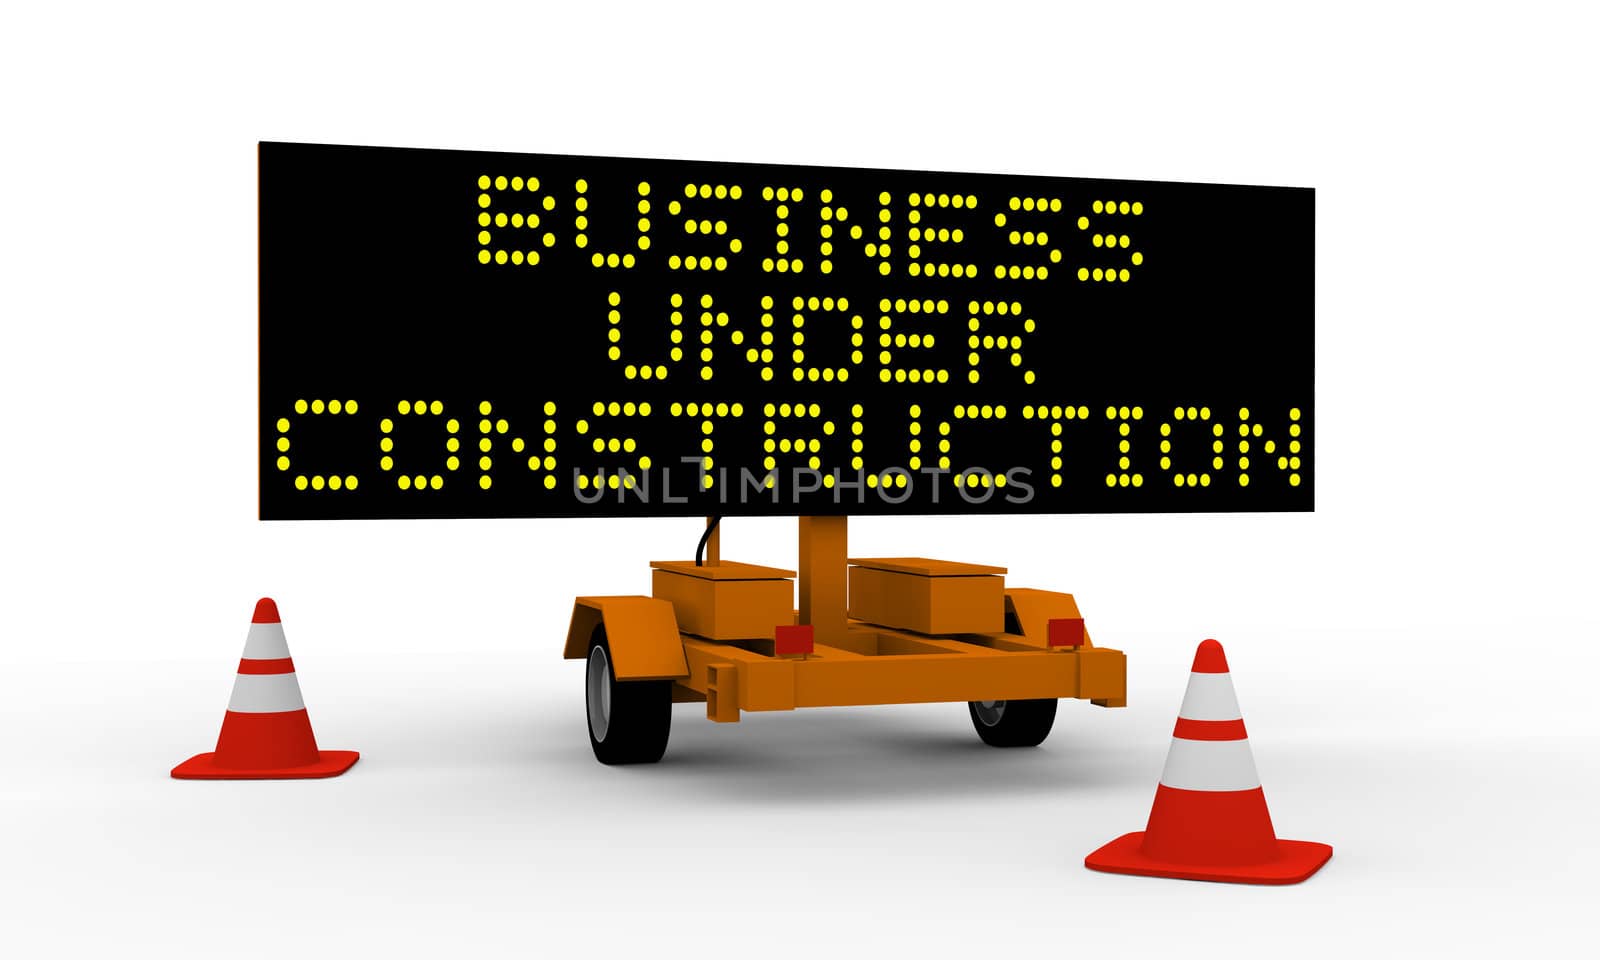 Business under construction by Harvepino